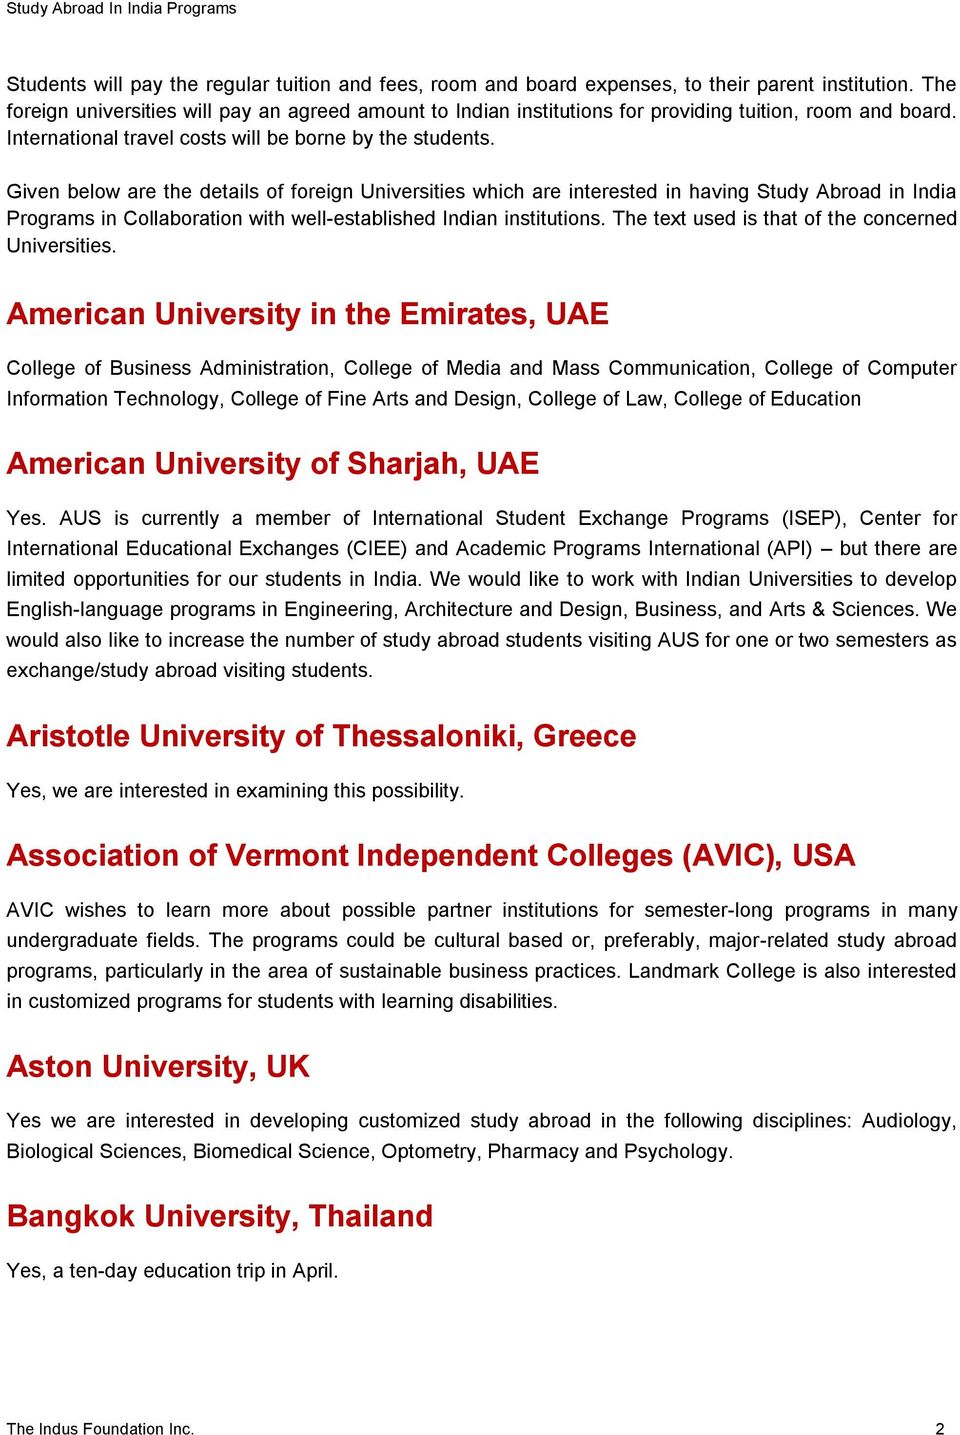 Given below are the details of foreign Universities which are interested in having Study Abroad in India Programs in Collaboration with well-established Indian institutions.